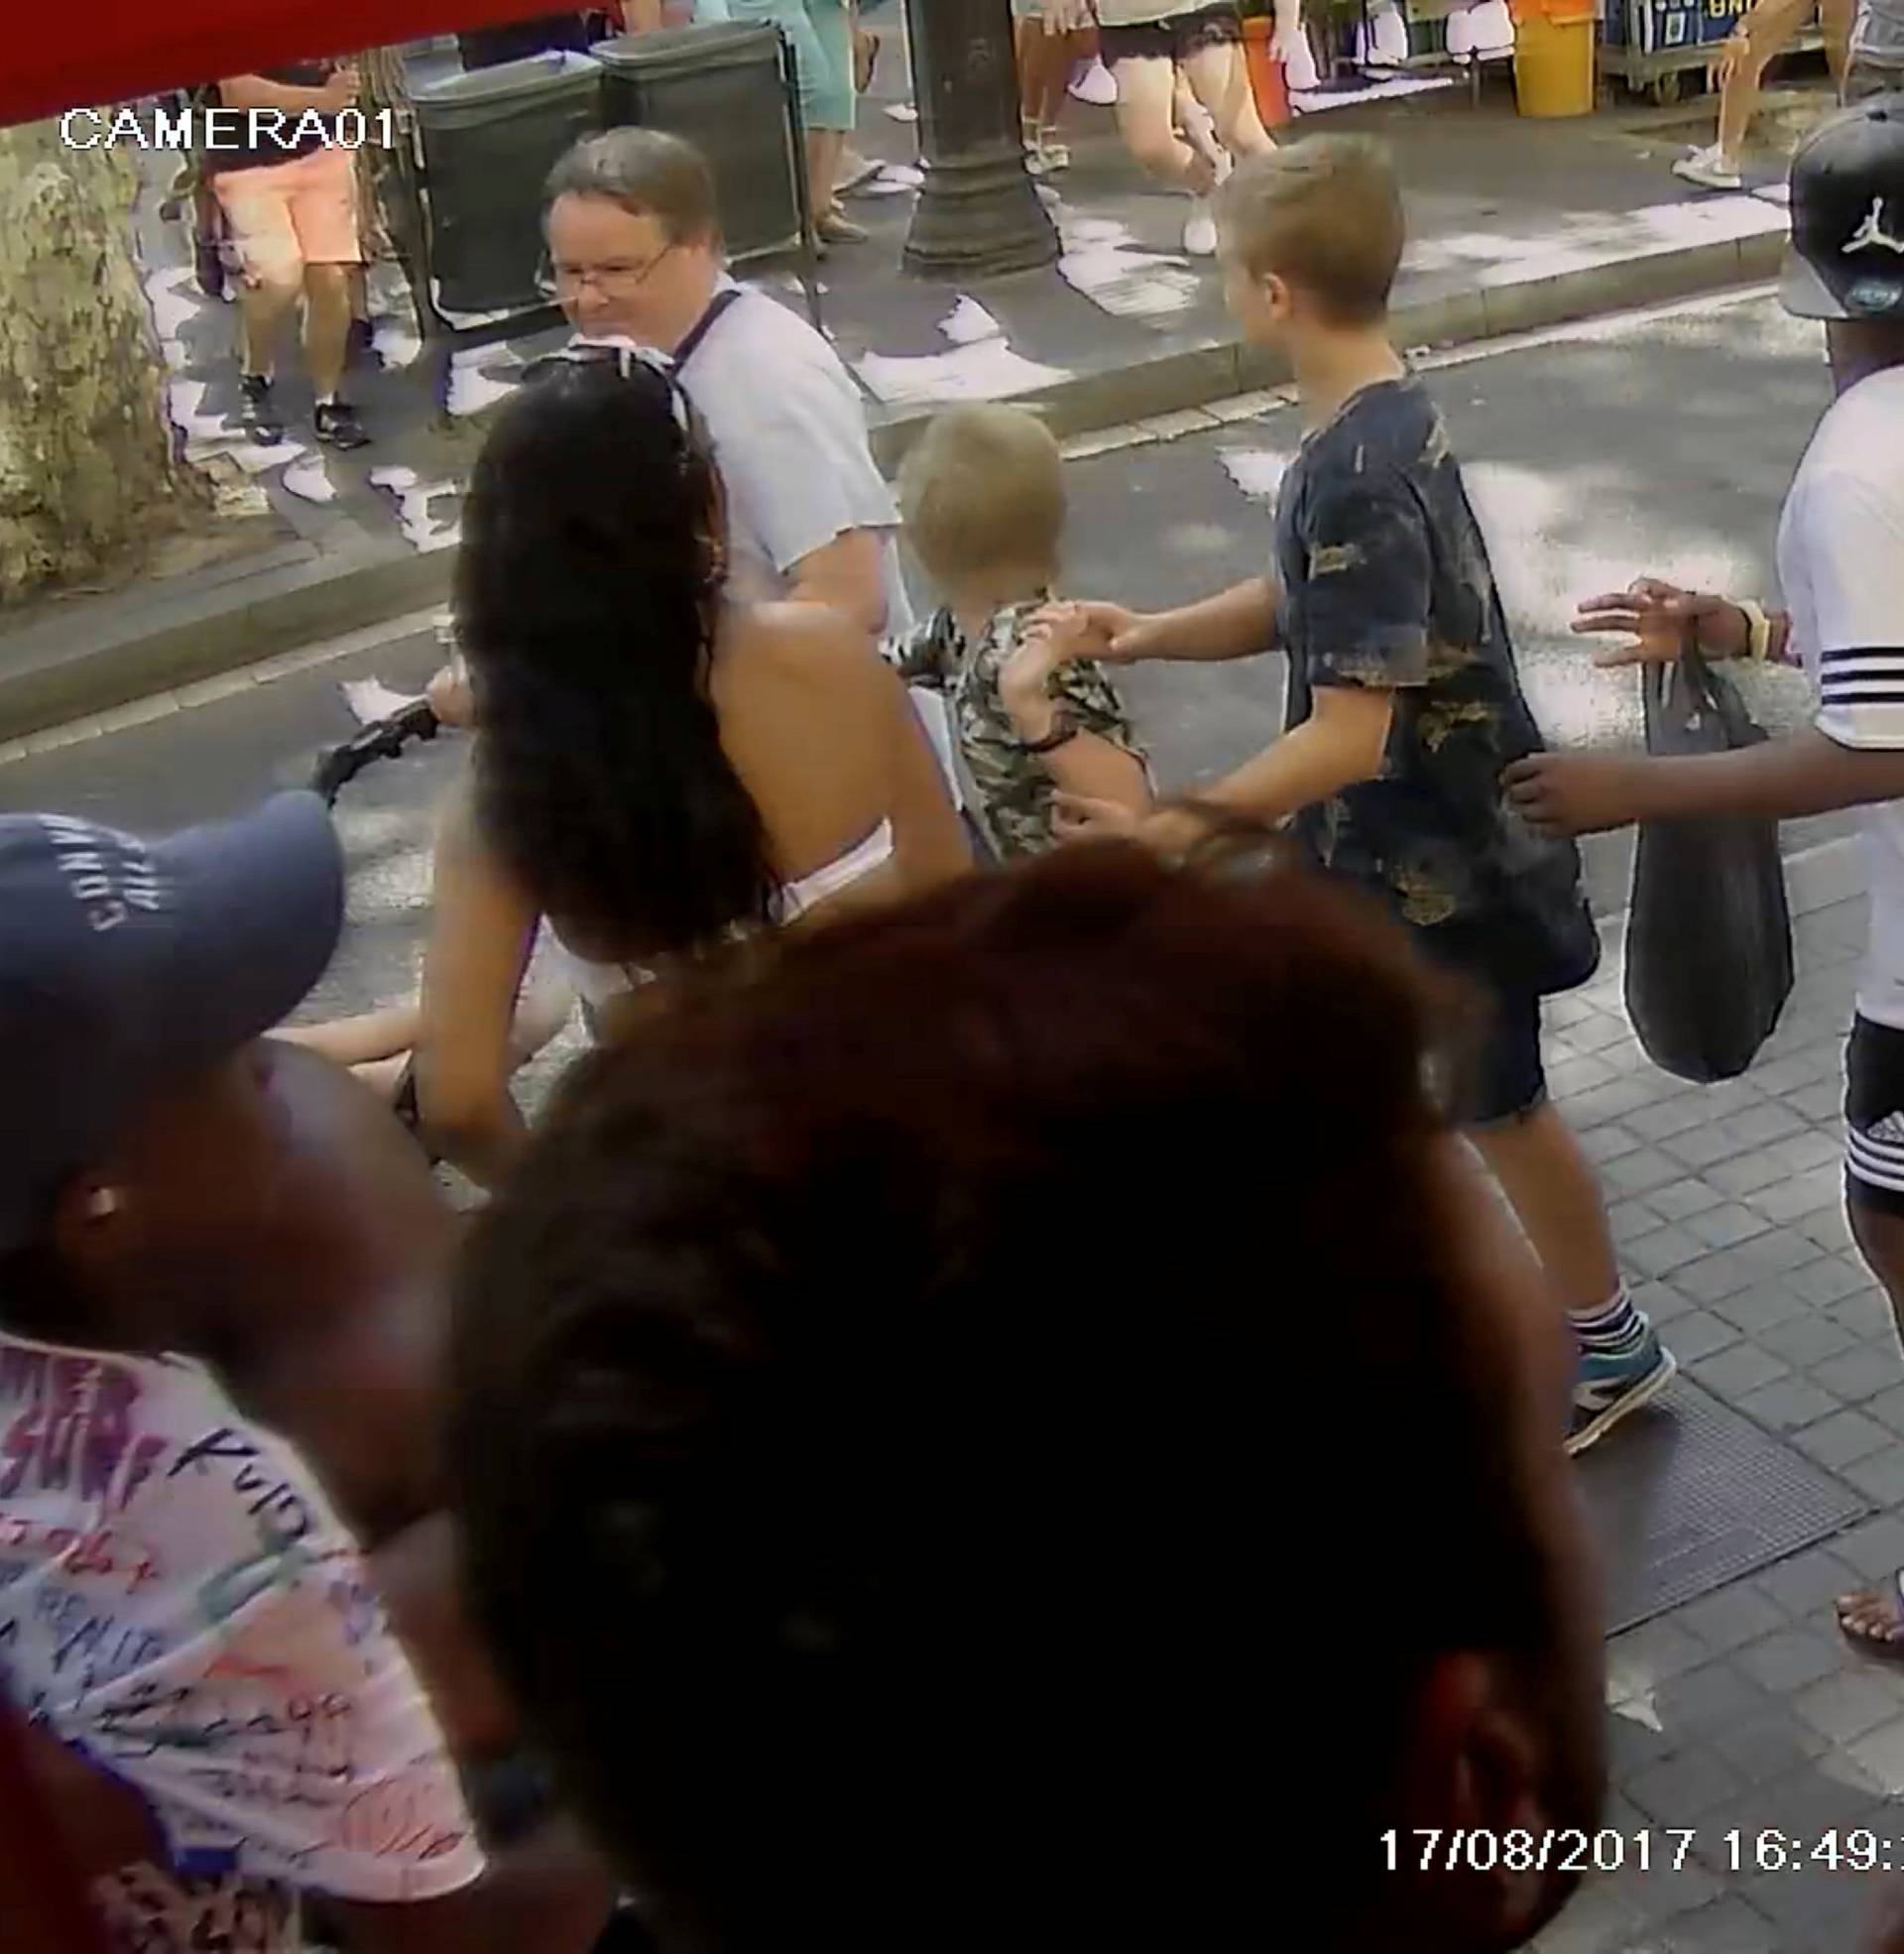 A still image from a CCTV footage shows people as they flee to safety during a van attack further down the street on La Rambla, in Barcelona